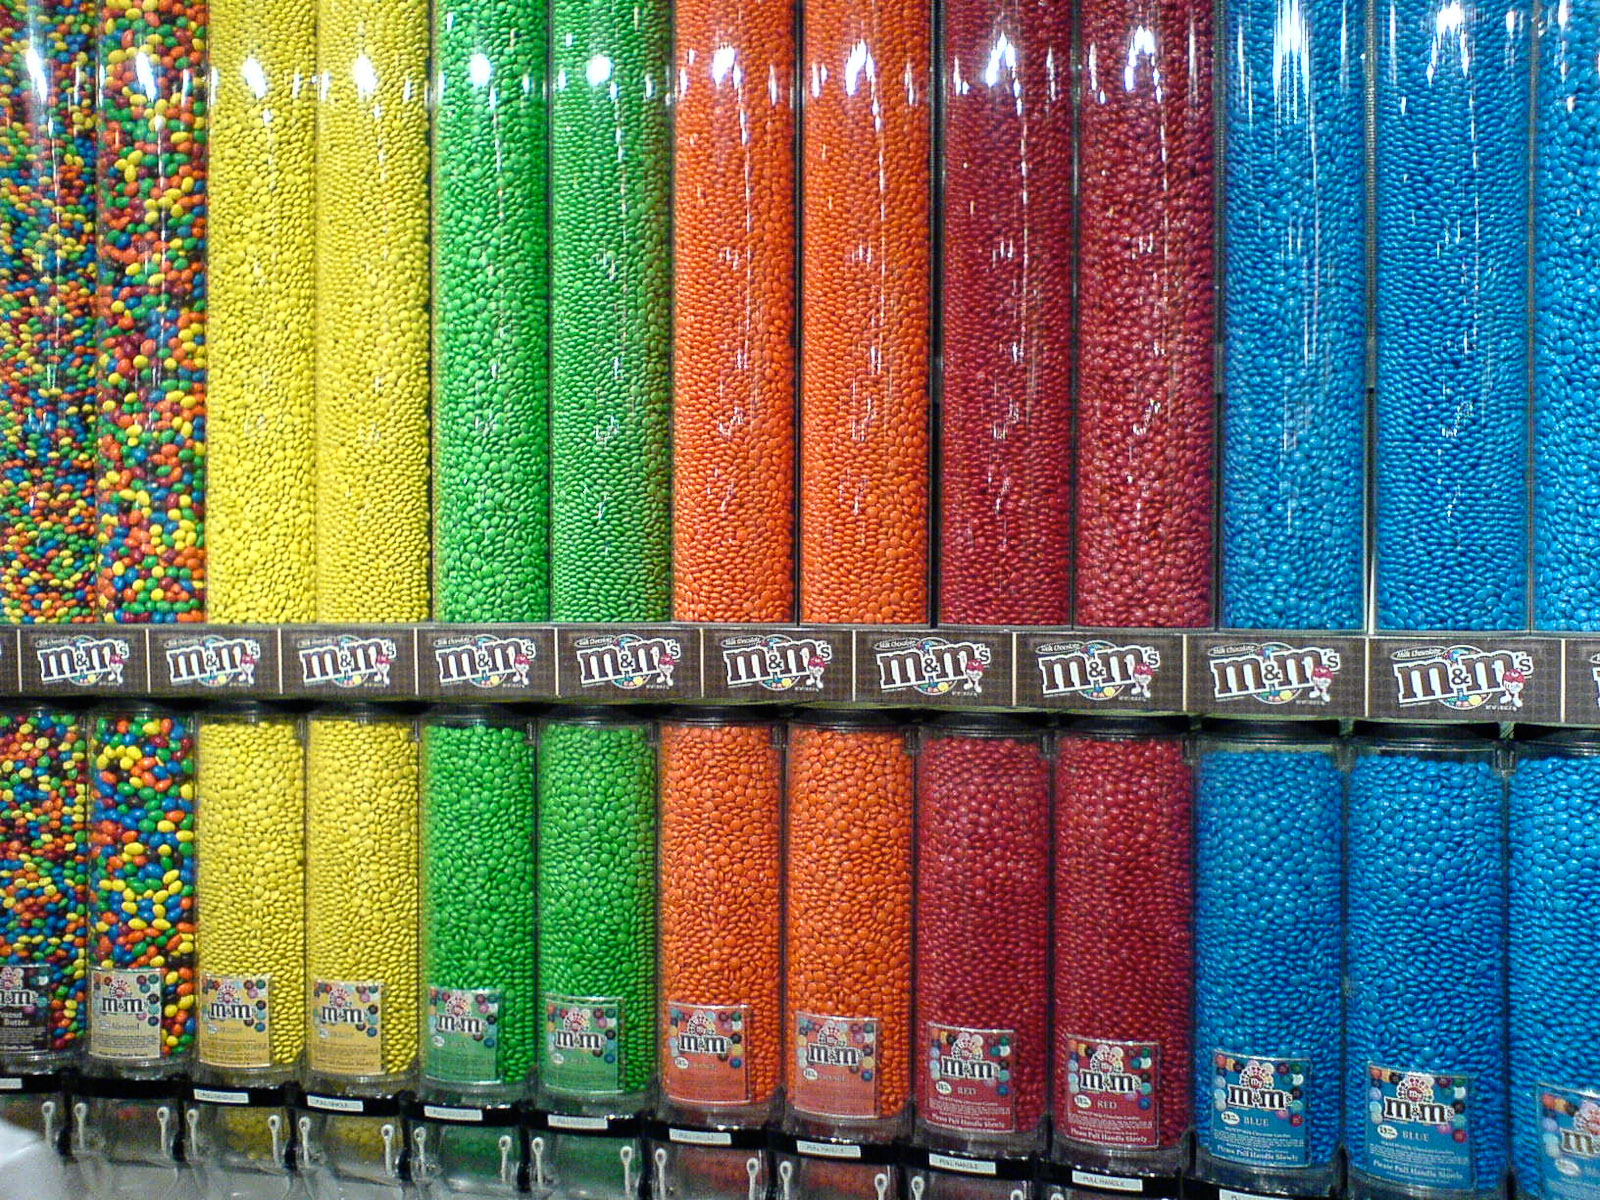 tubes filled with individual colors of M&Ms